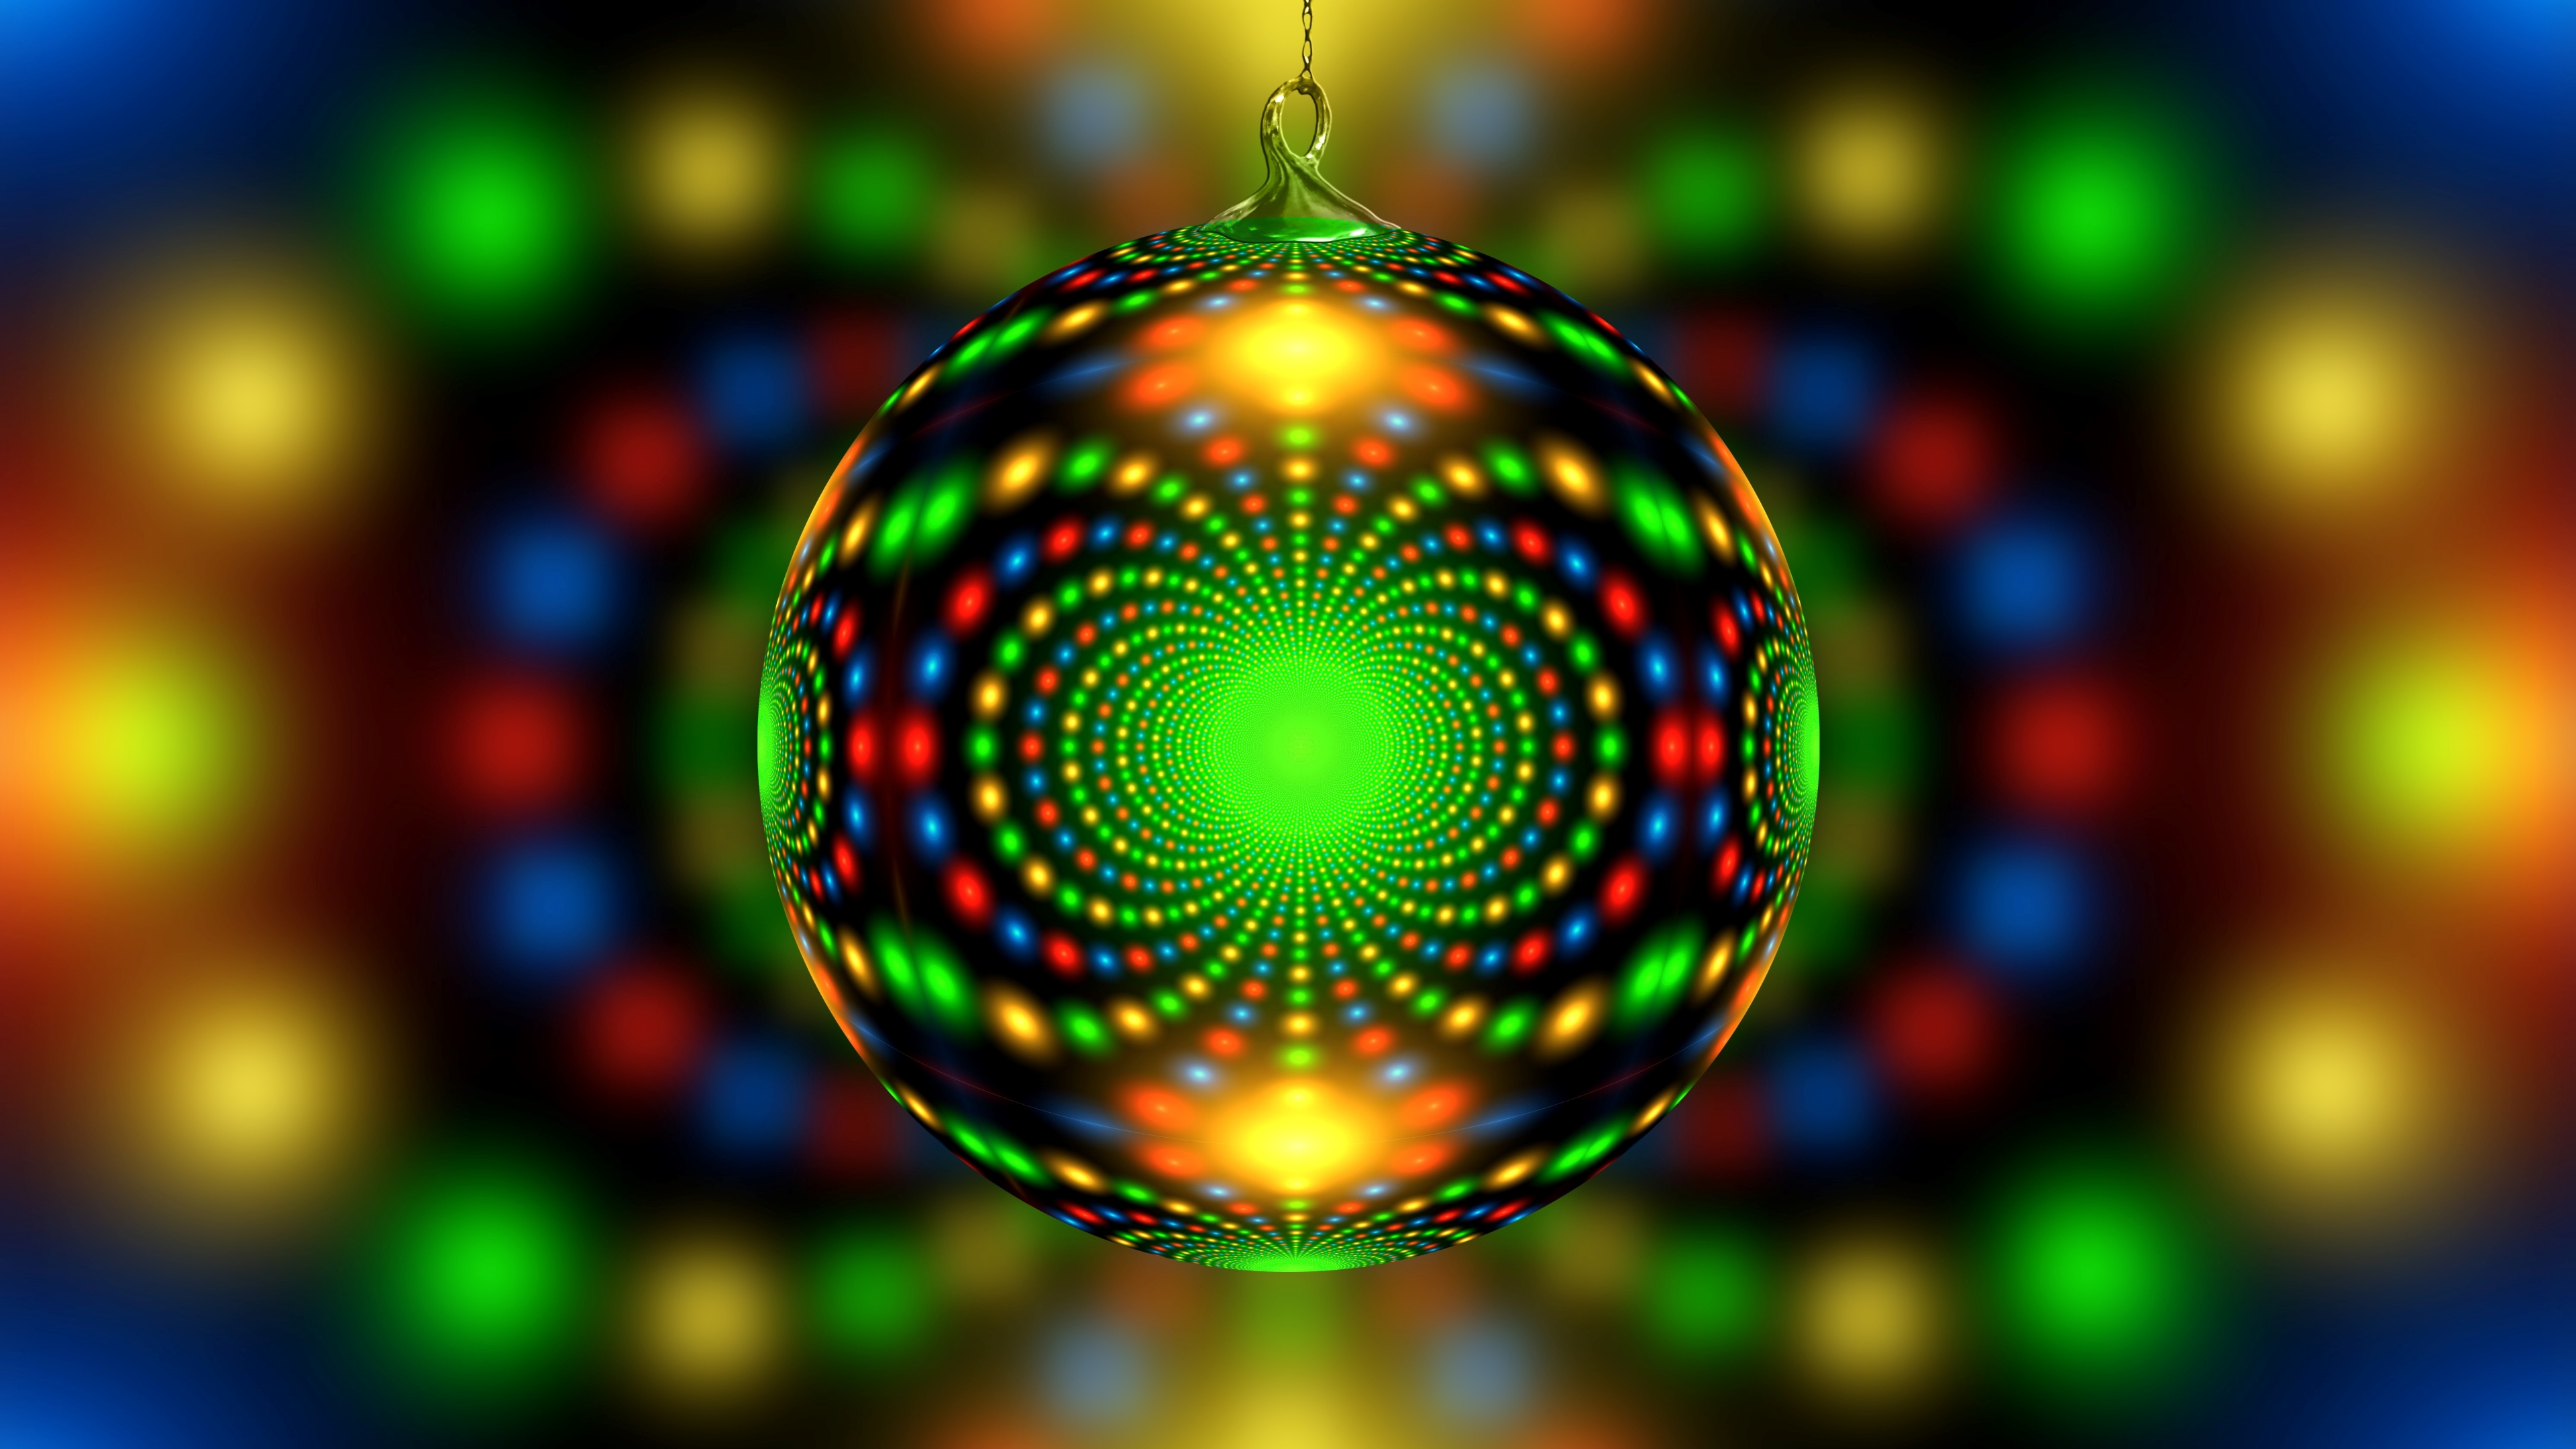 Abstract Ornament Christmas Ornaments Colorful 3840x2160